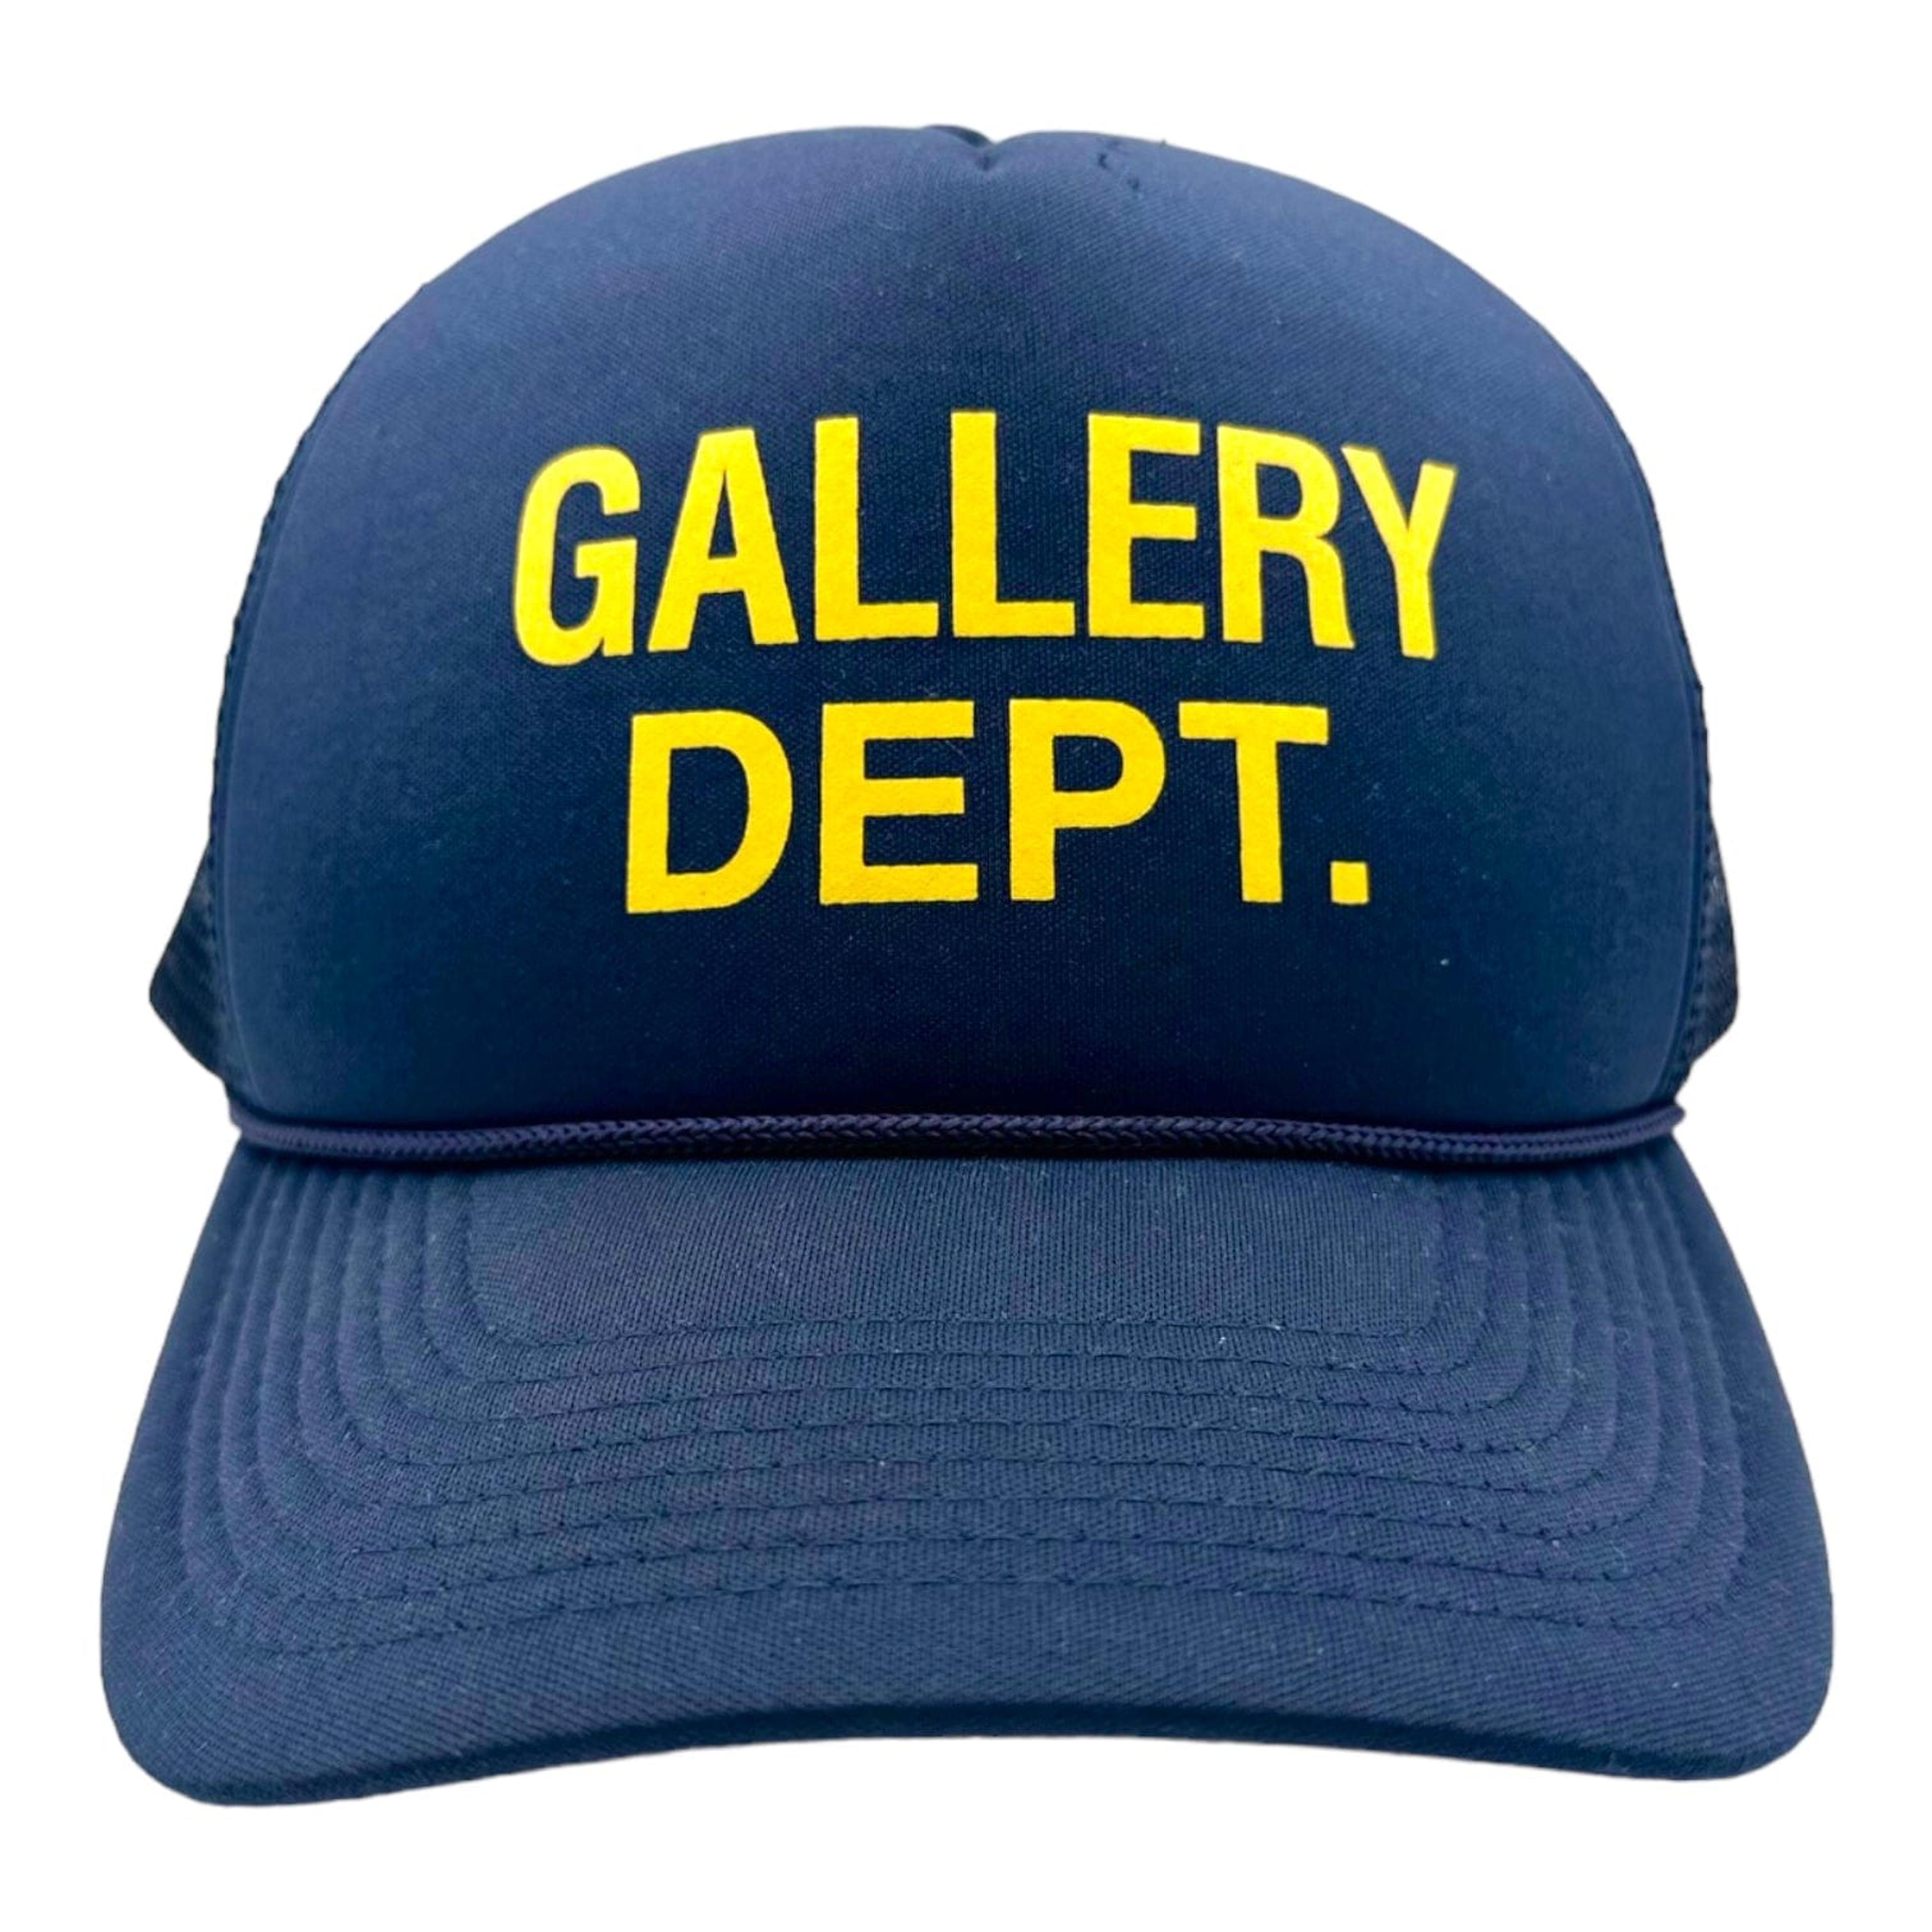 Gallery Department Logo Trucker Hat Navy/Yellow Pre-Owned